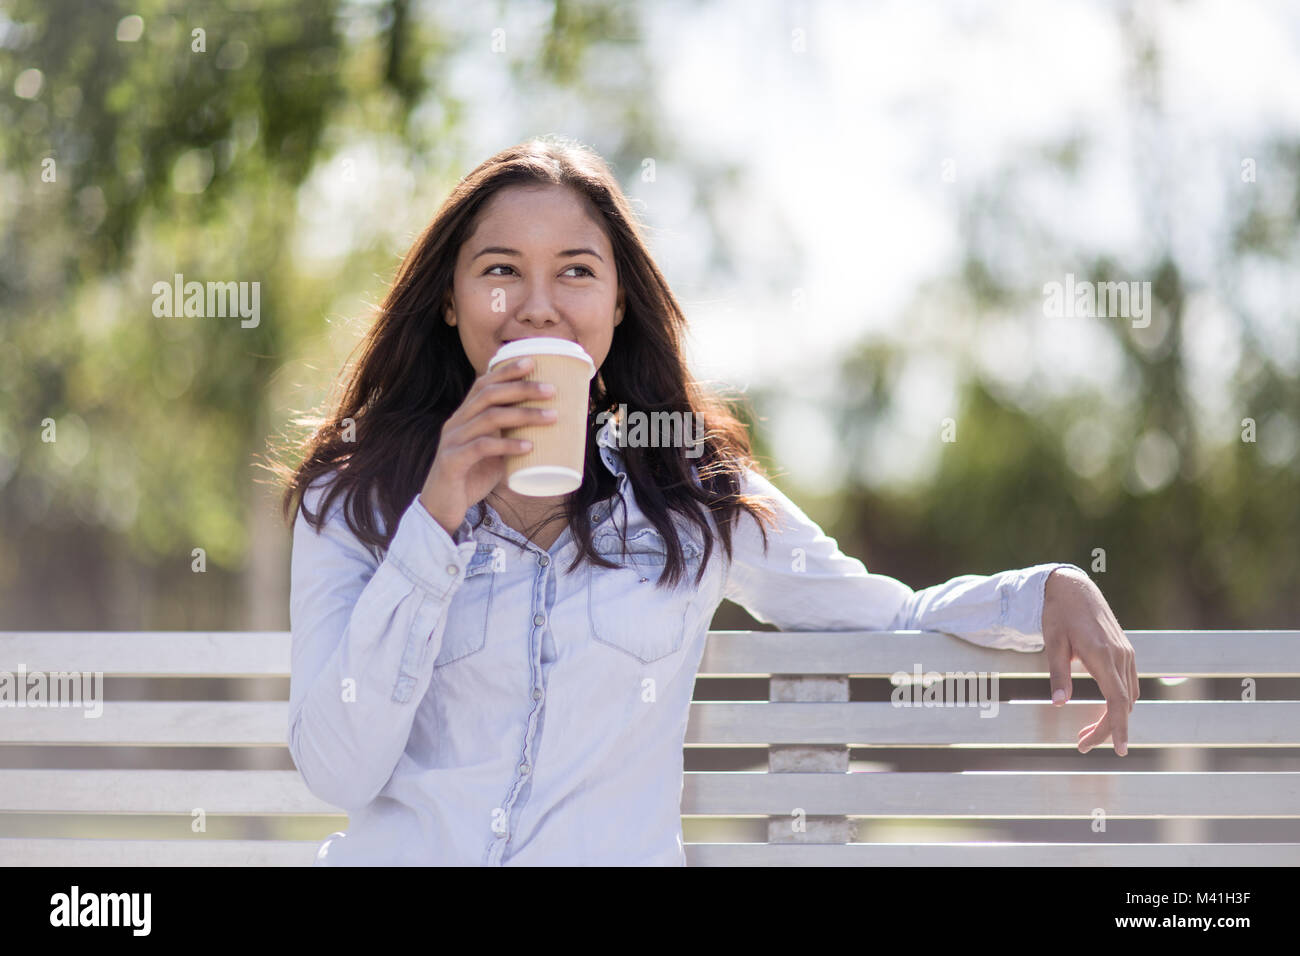 Woman sitting on bench in park Stock Photo